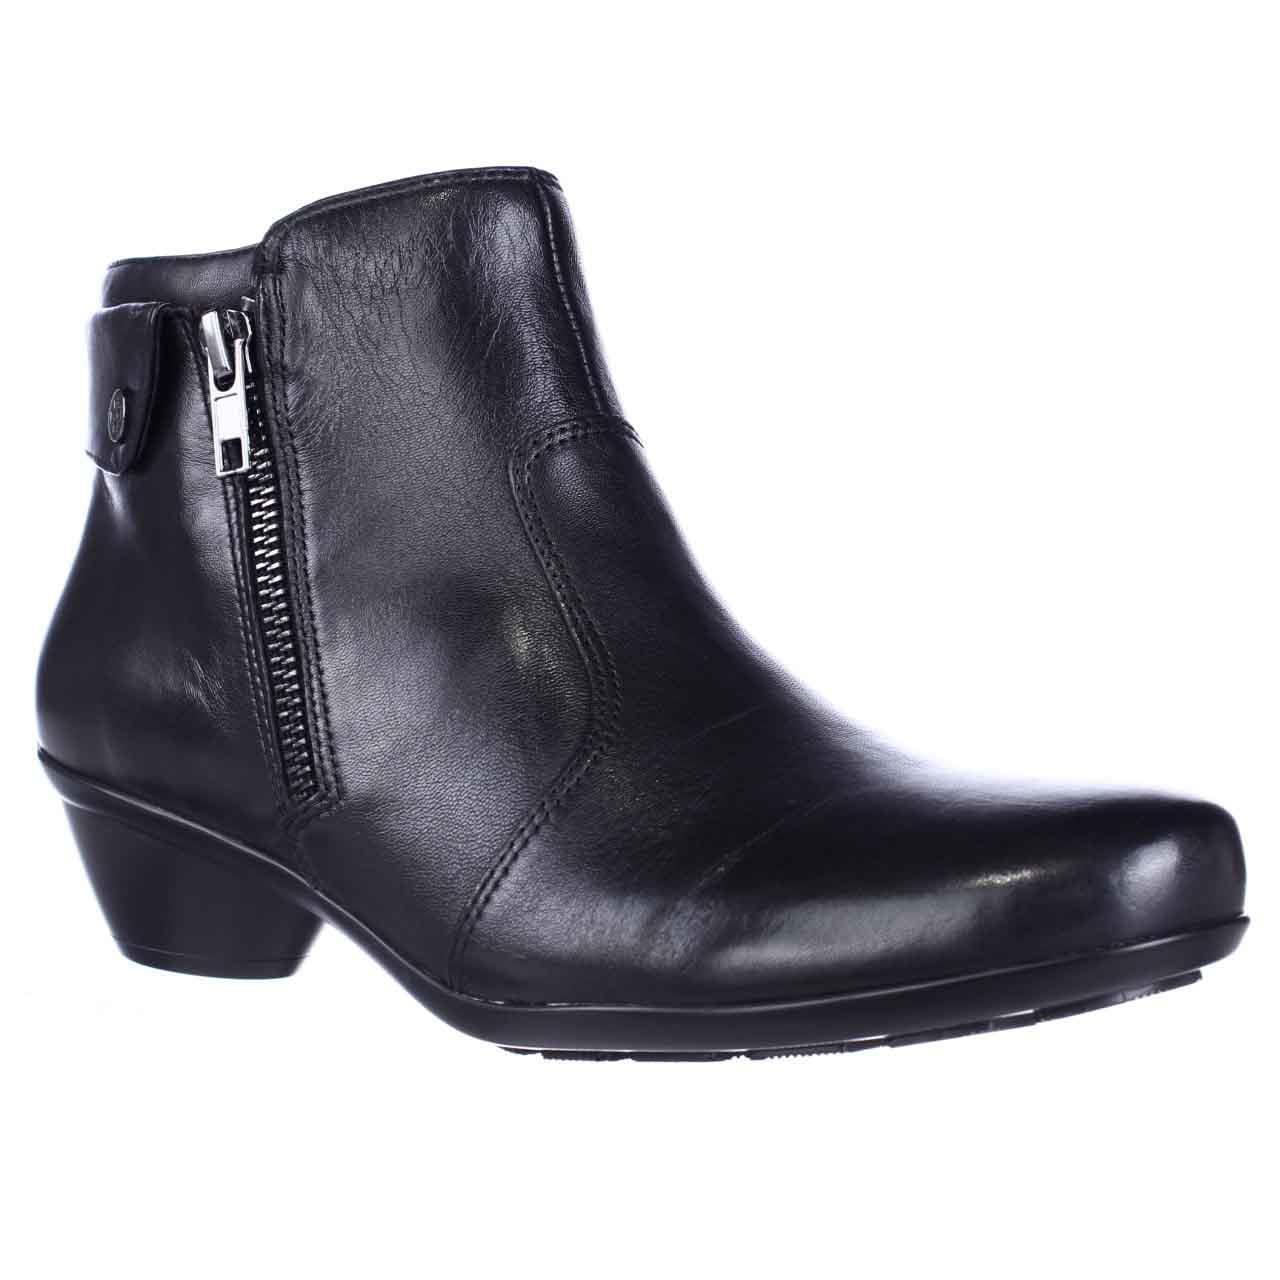 Naturalizer - Womens naturalizer Haley Slip Resistant Ankle Boots ...